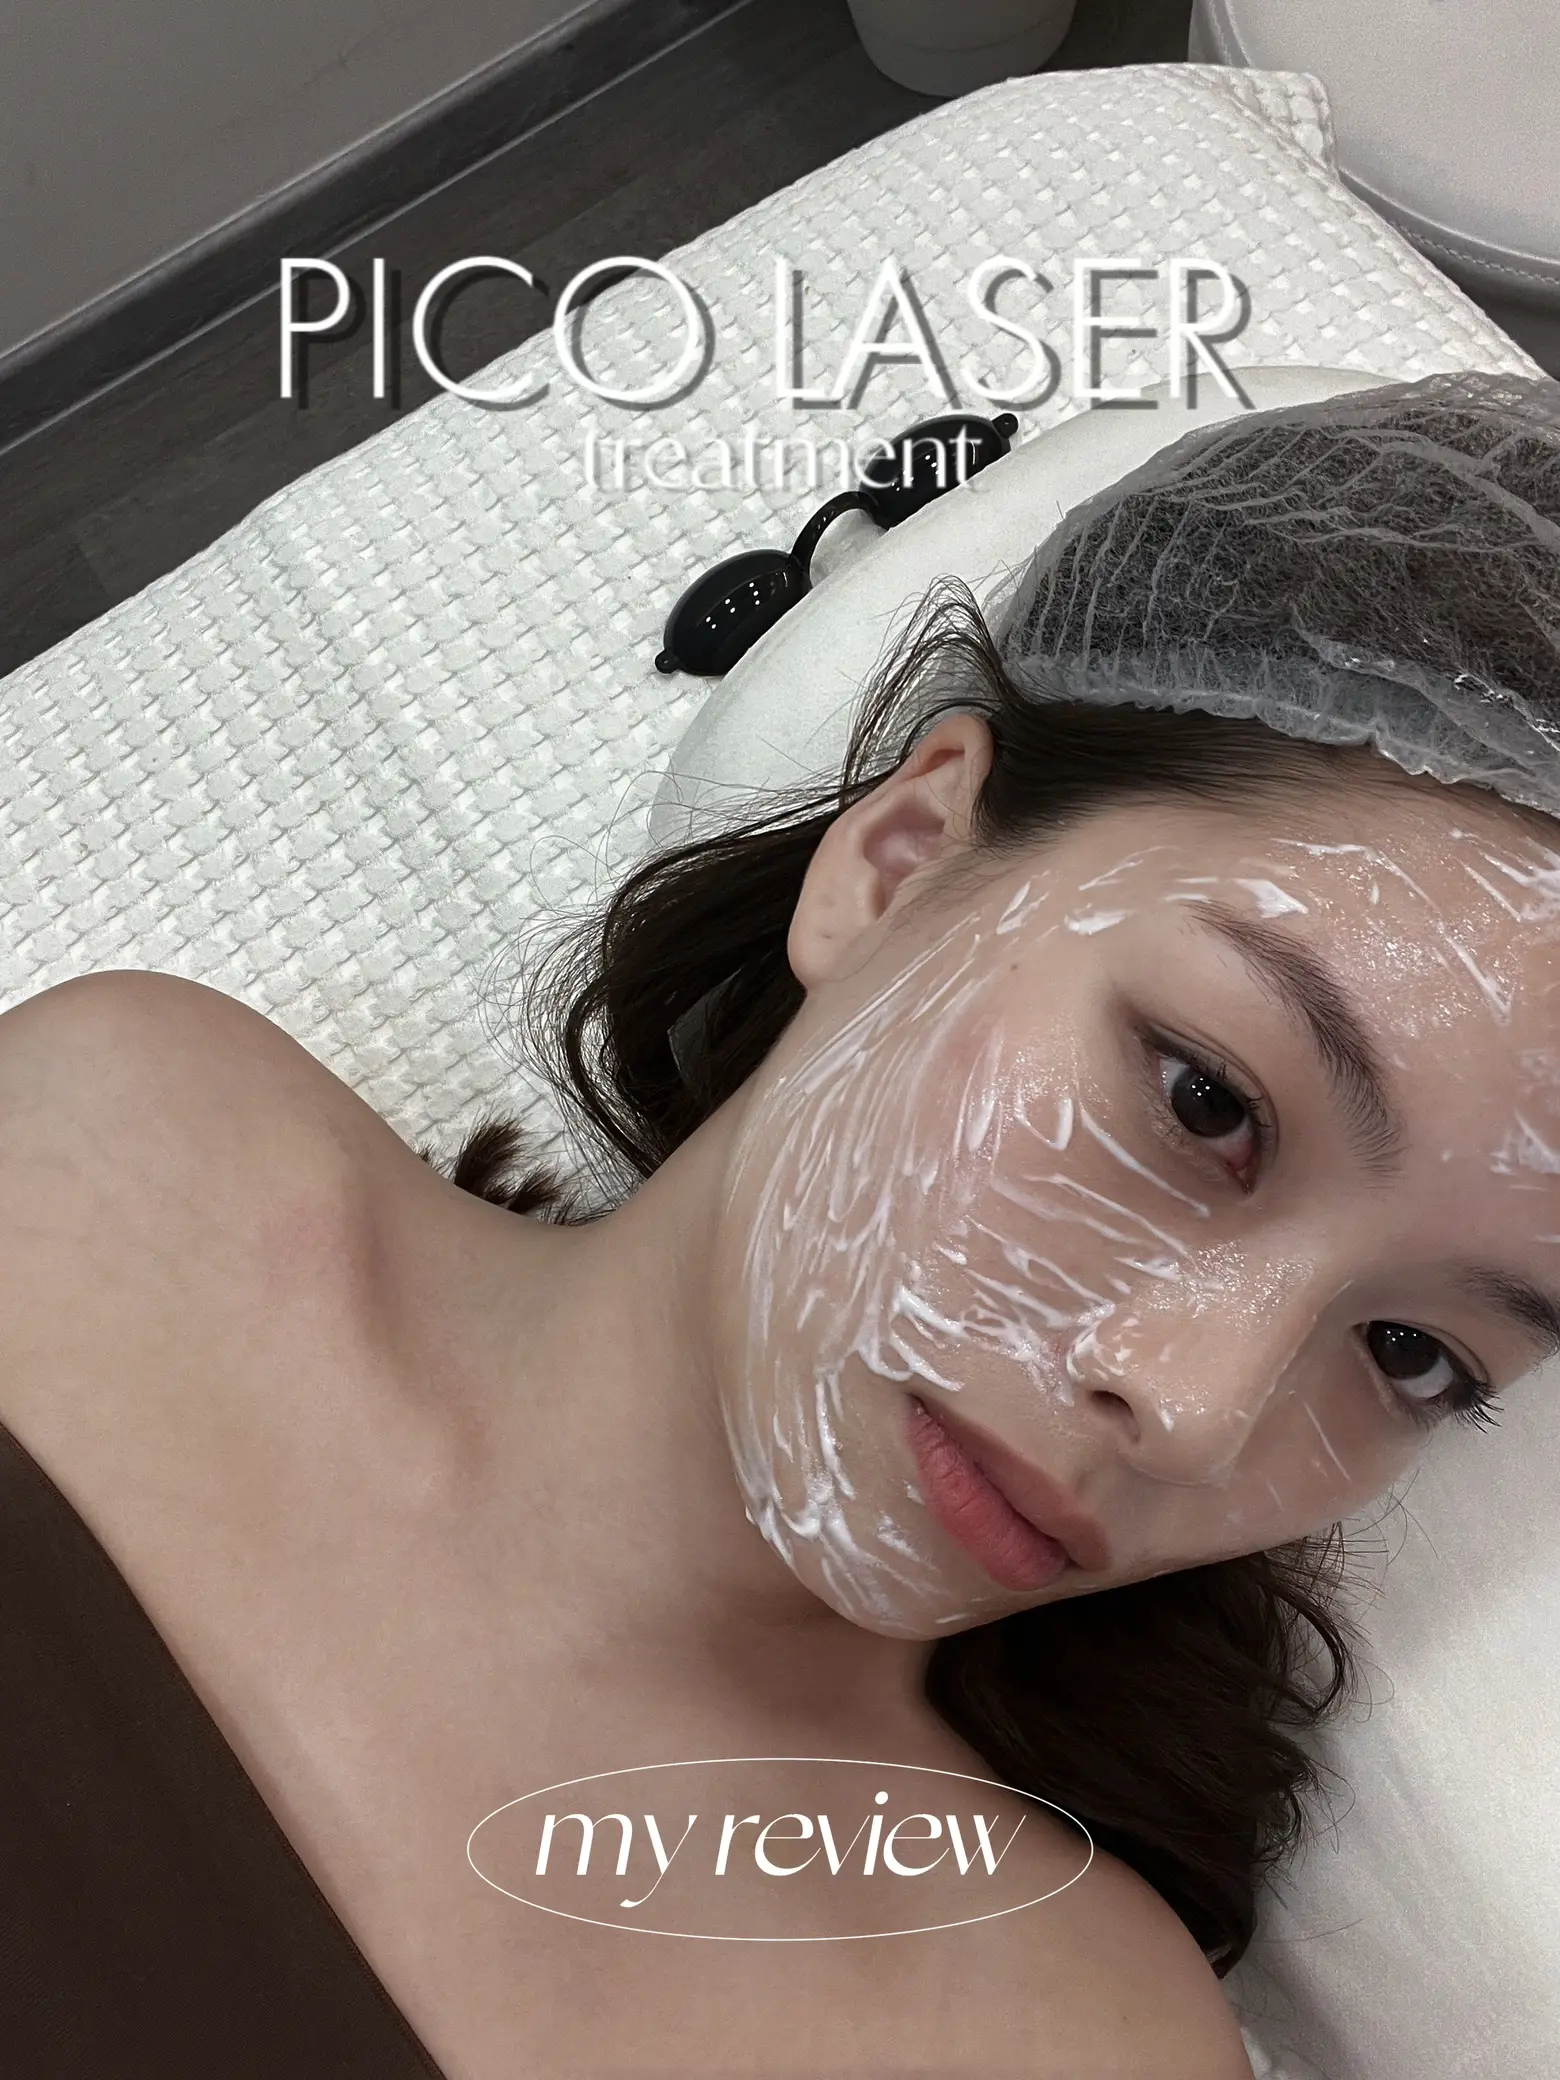 i tried pico laser for 3 months⚡️'s images(0)